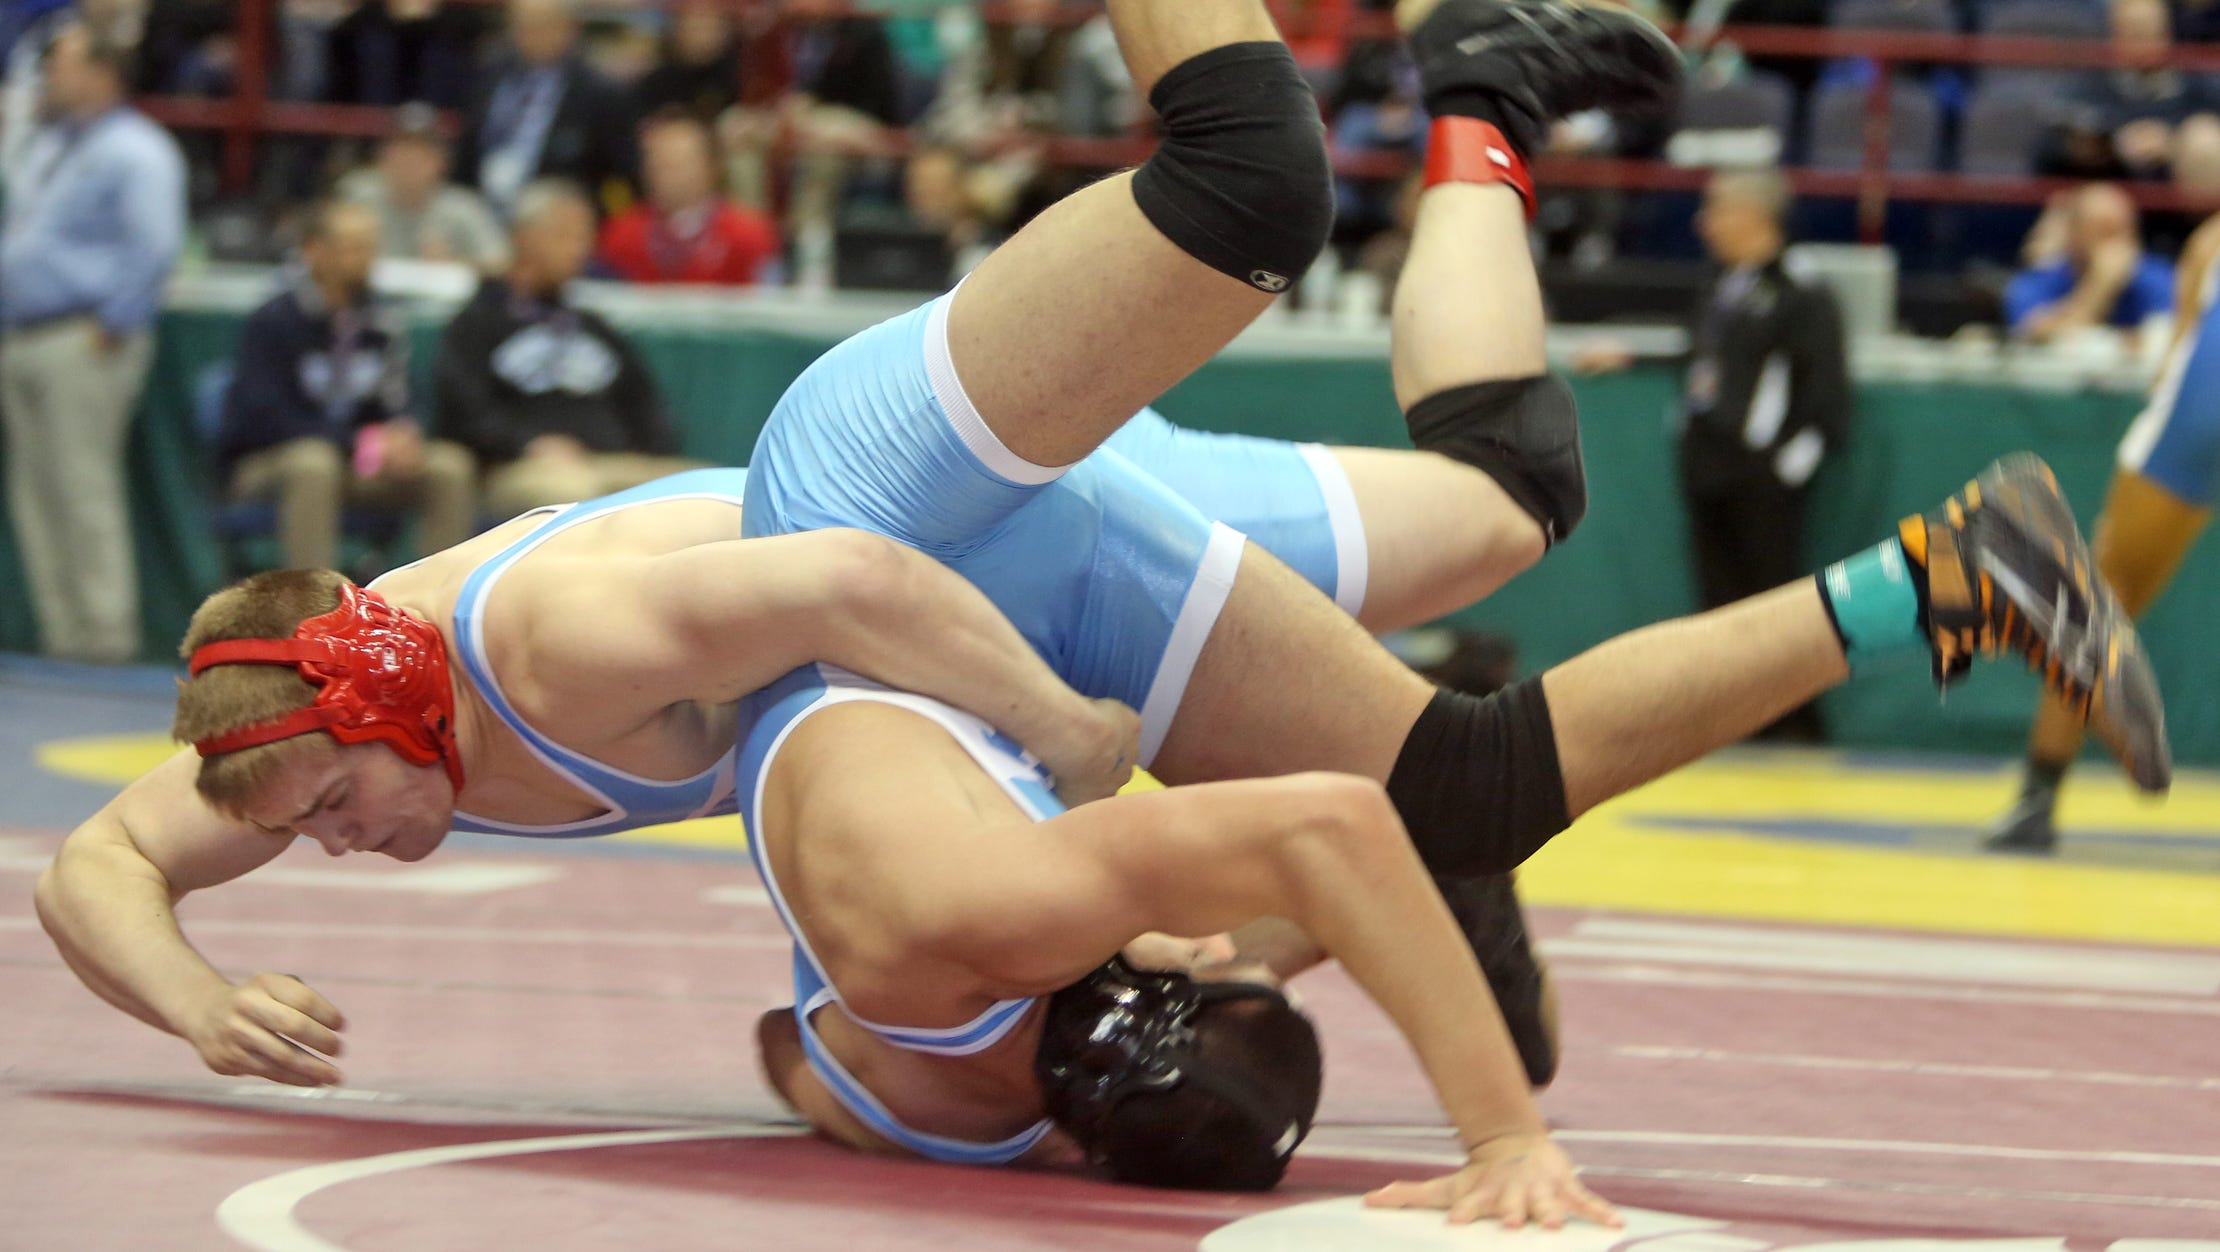 Wrestling Day 1 of NY State Wrestling Championship results